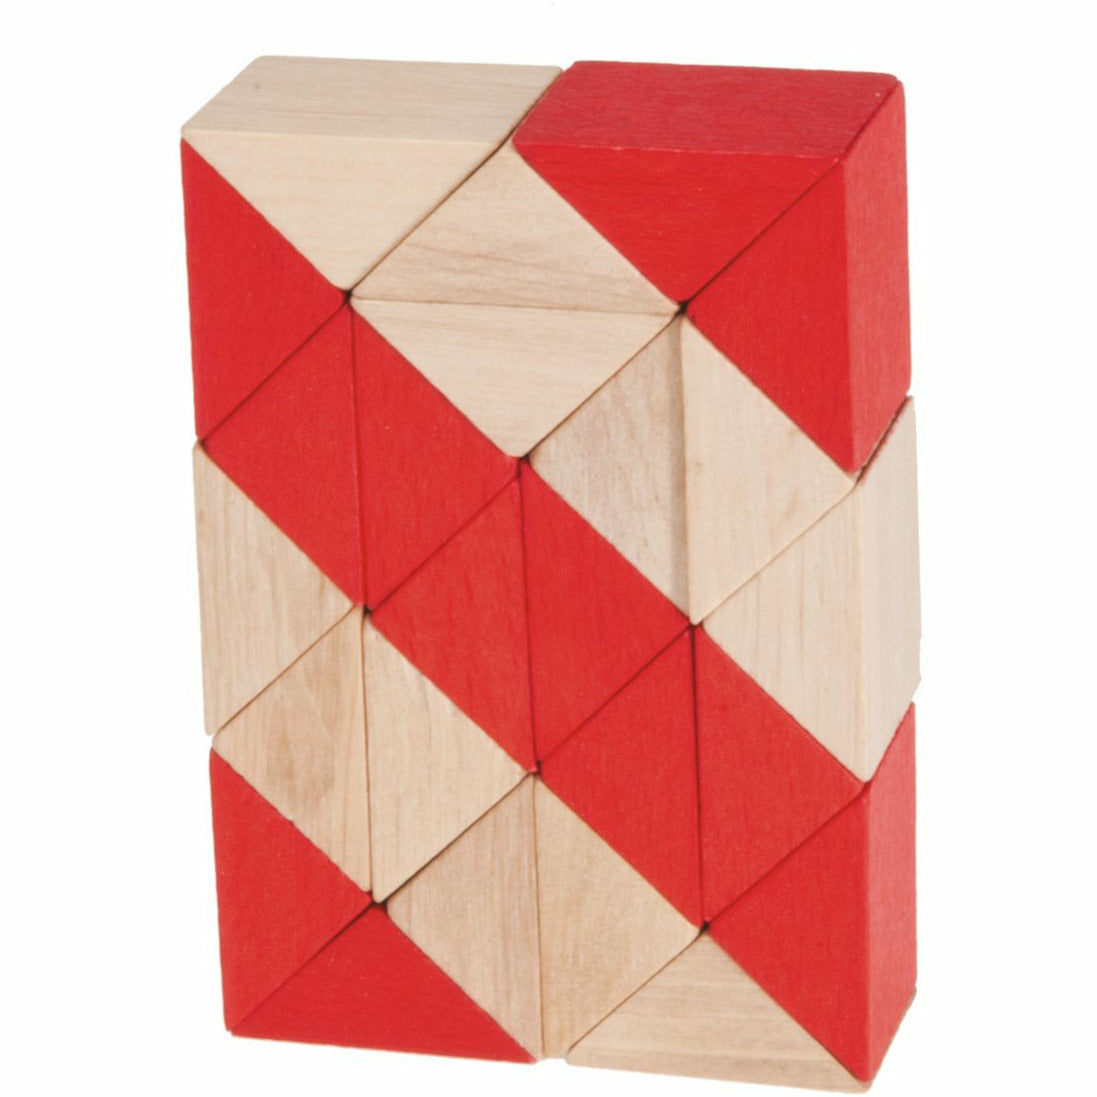 IQ-Test | Snake-Puzzle Holz | zweifarbig natur/rot